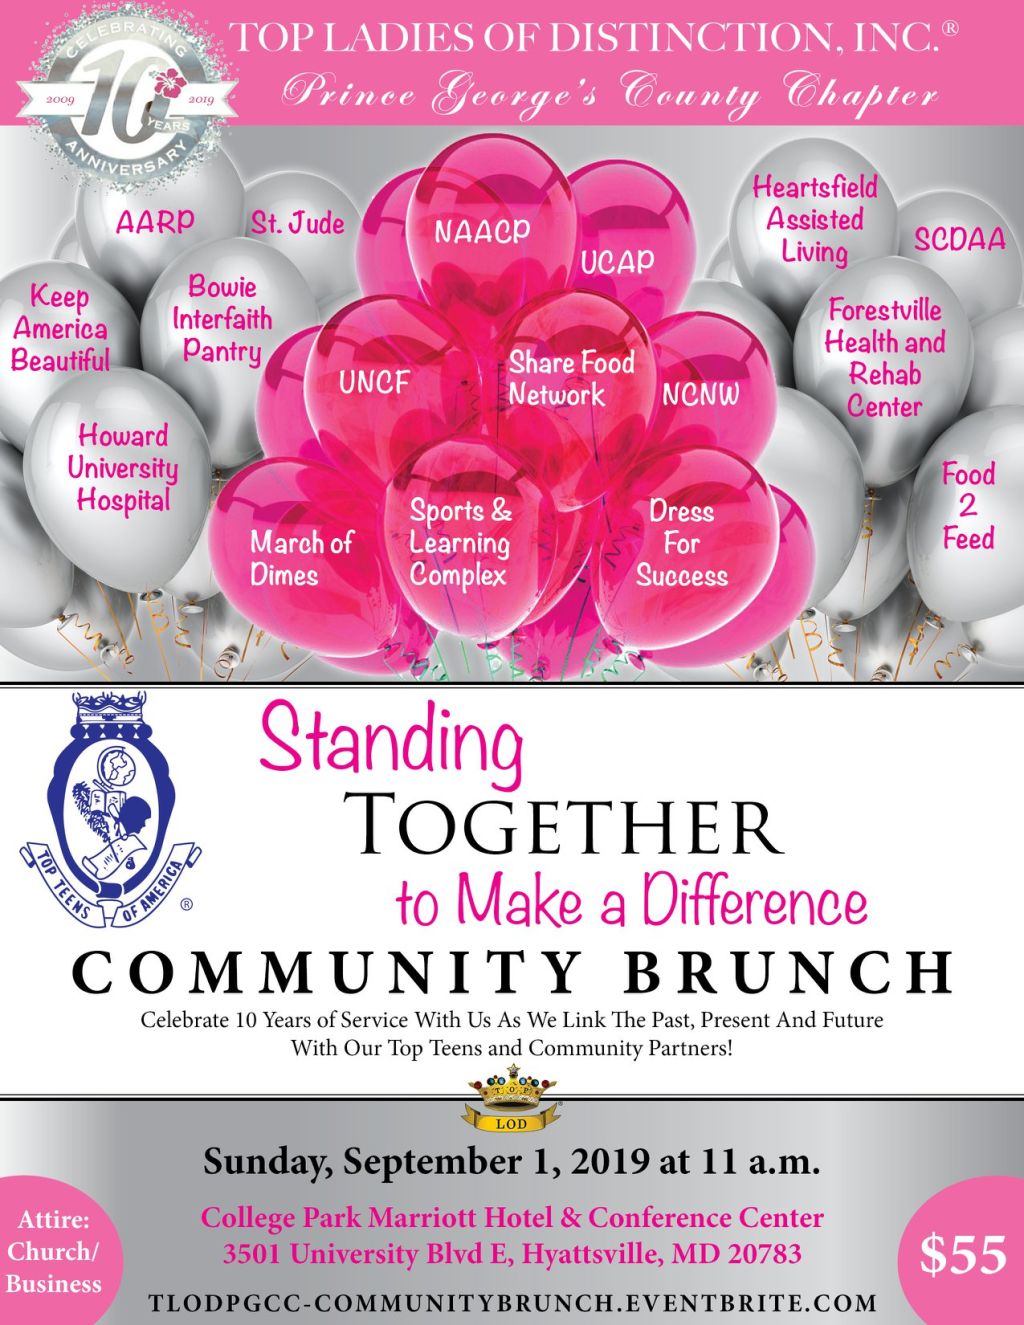 Top Ladies of Distinction, Inc., Prince George's County Chapter 10th Anniversary Brunch